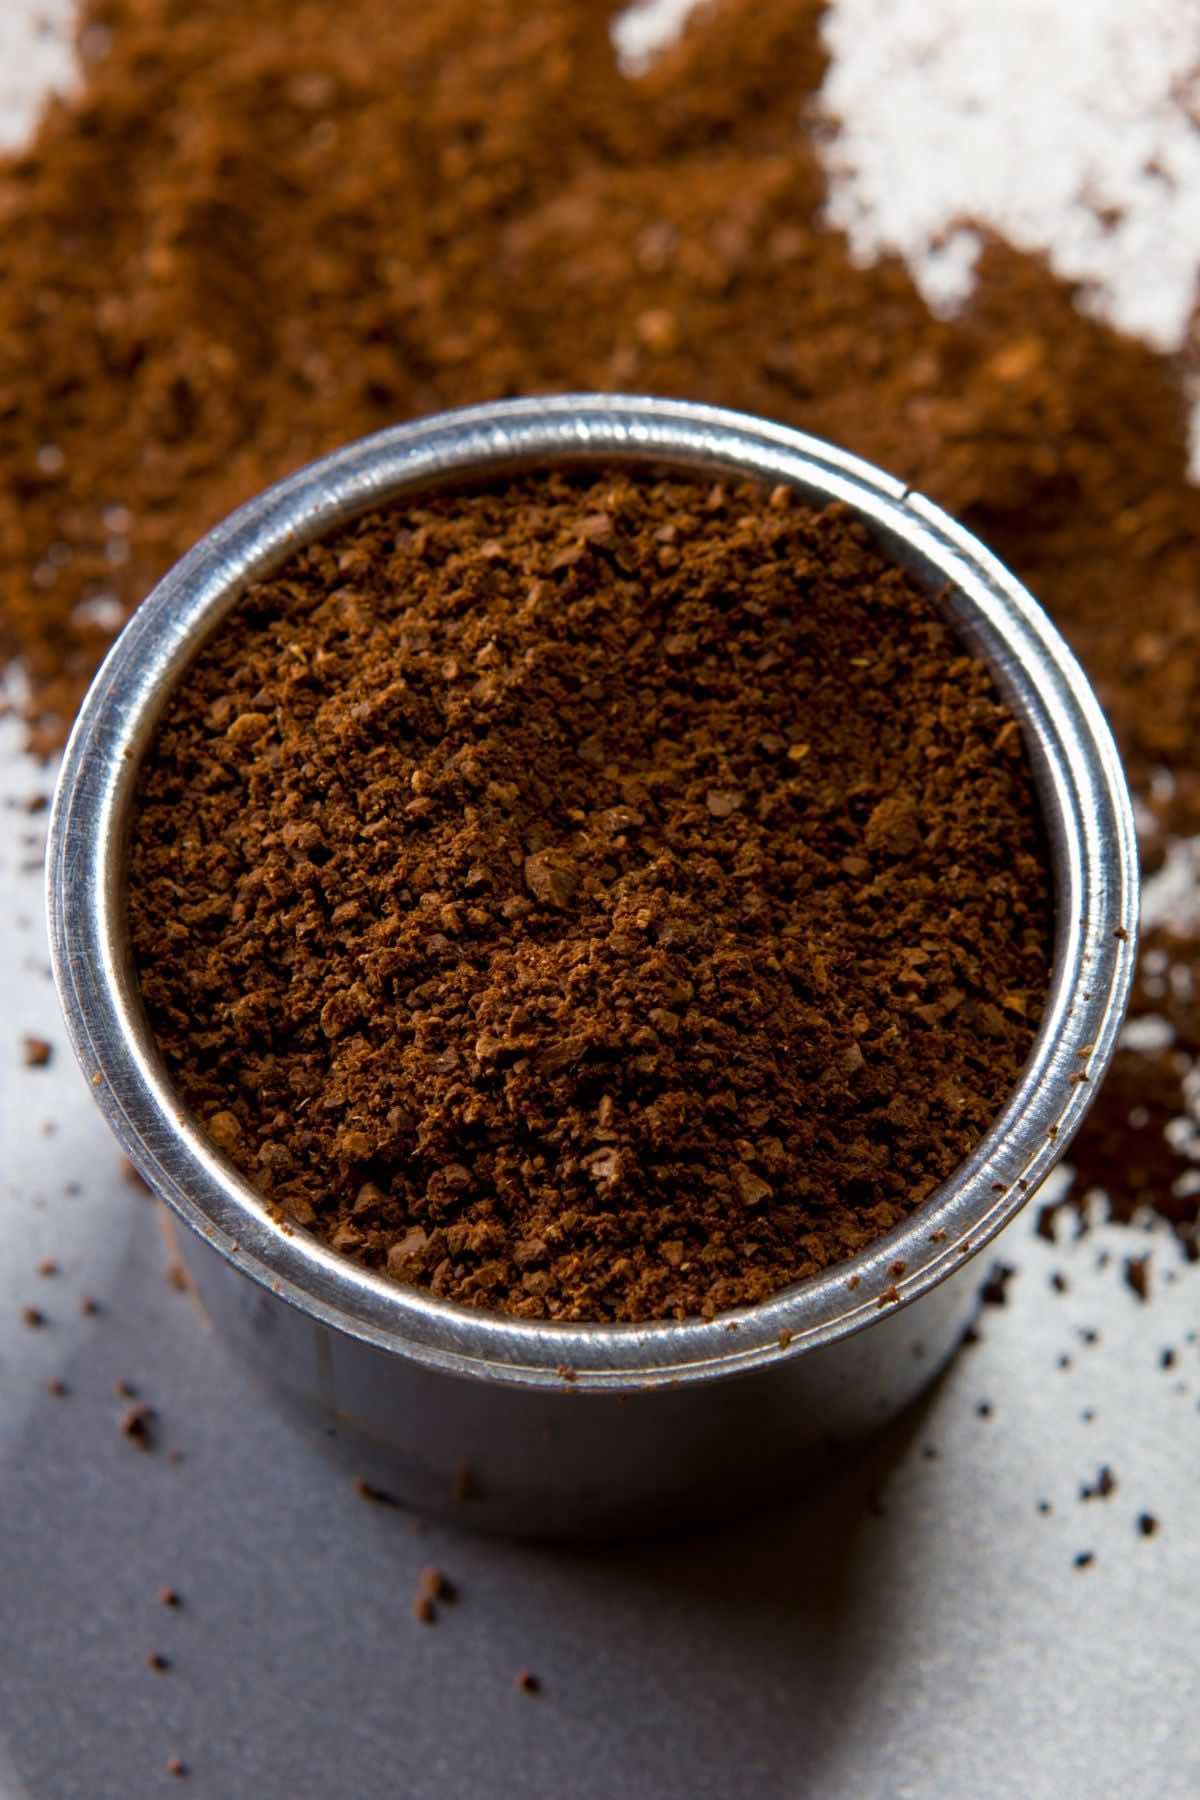 Closeup showing coarsely ground coffee.